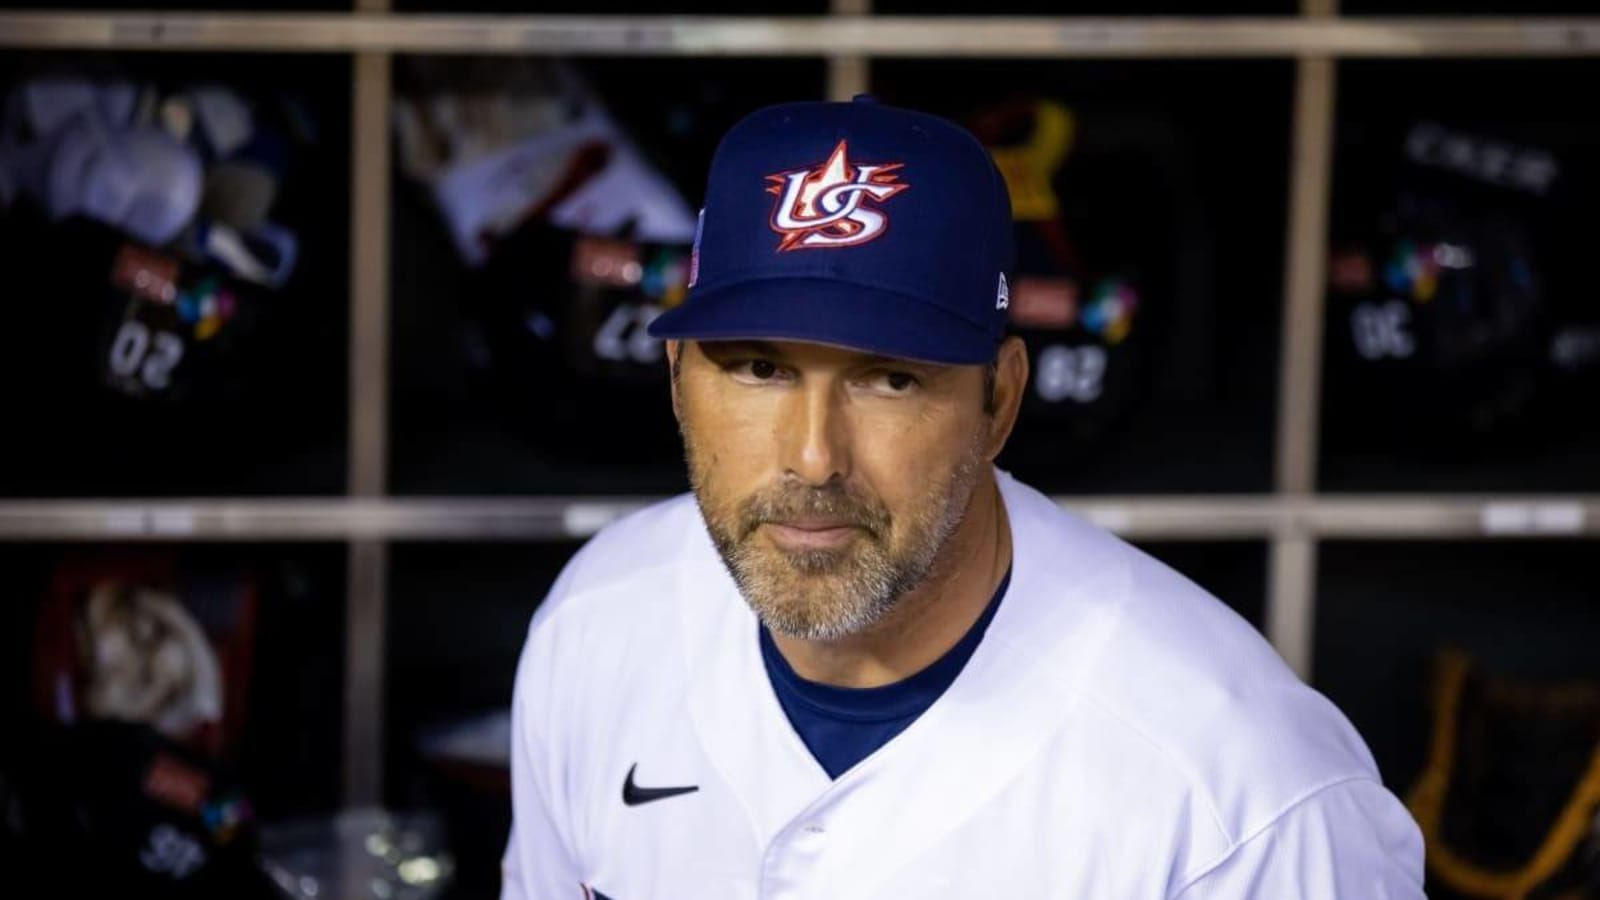 OPINION: Team USA&#39;s Mark DeRosa Will Make a Great MLB Manager